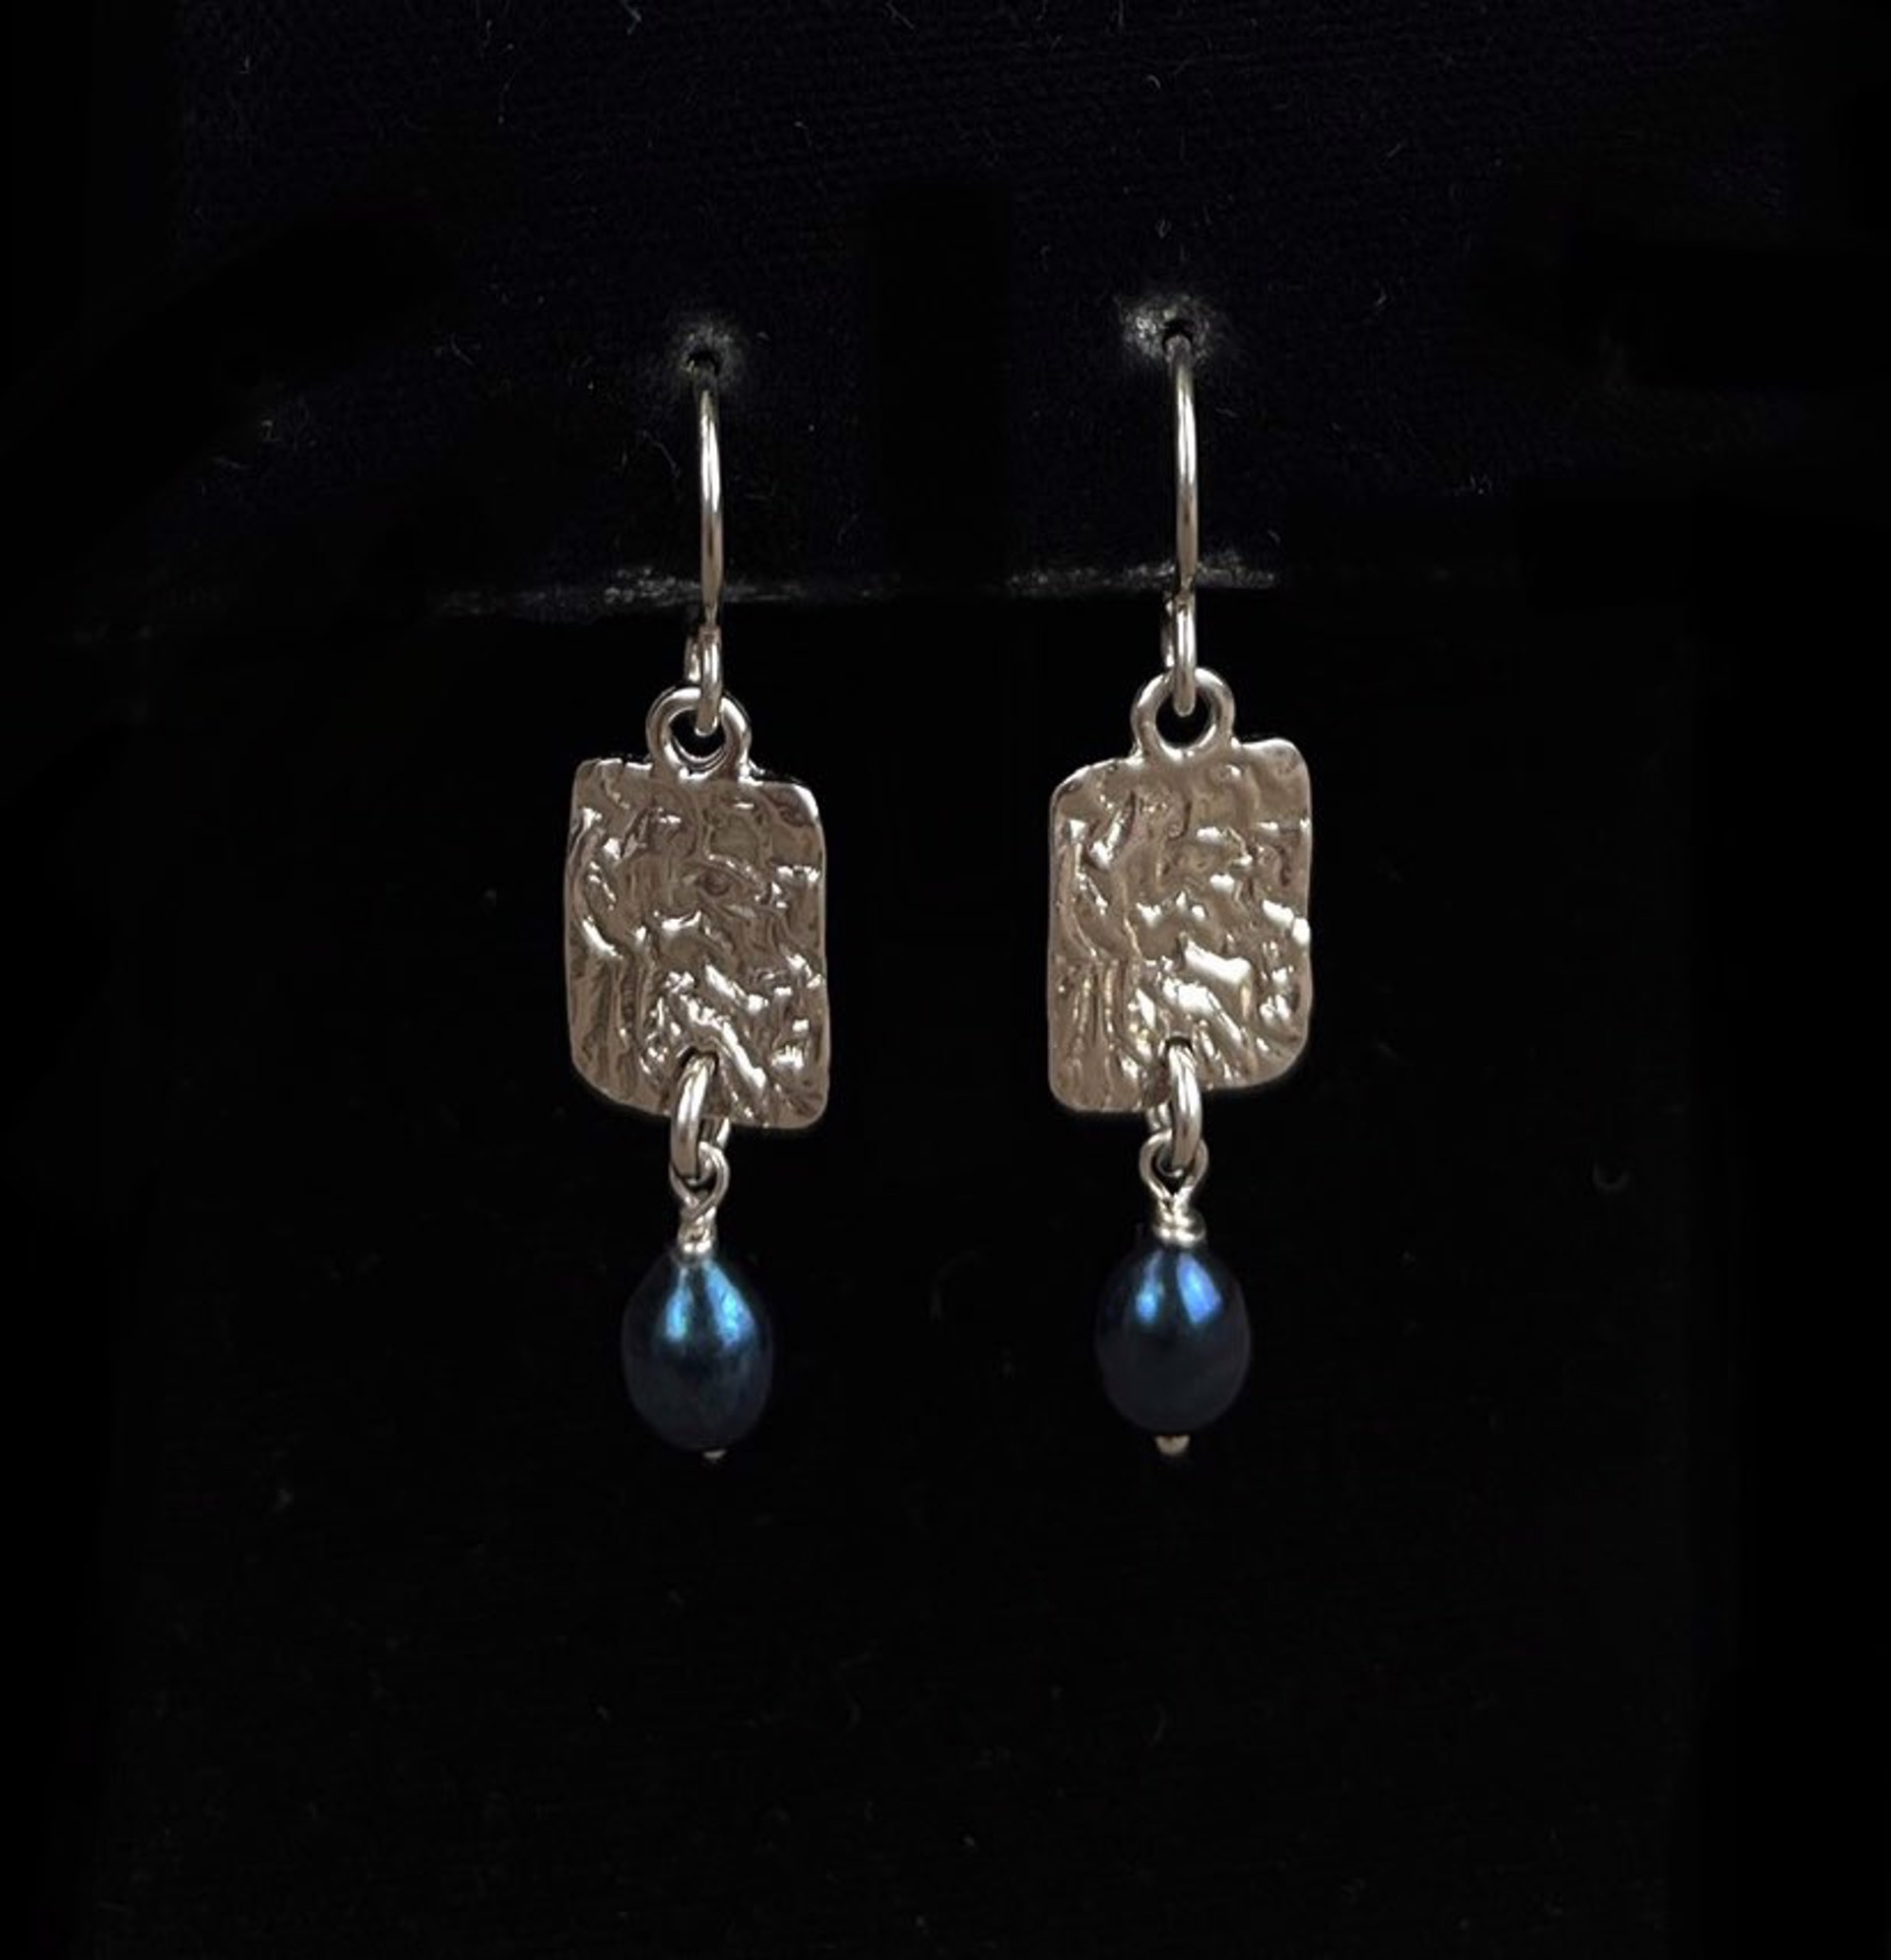 Reticulated Rectangle with Blue Pearl Earrings by Nichole Collins